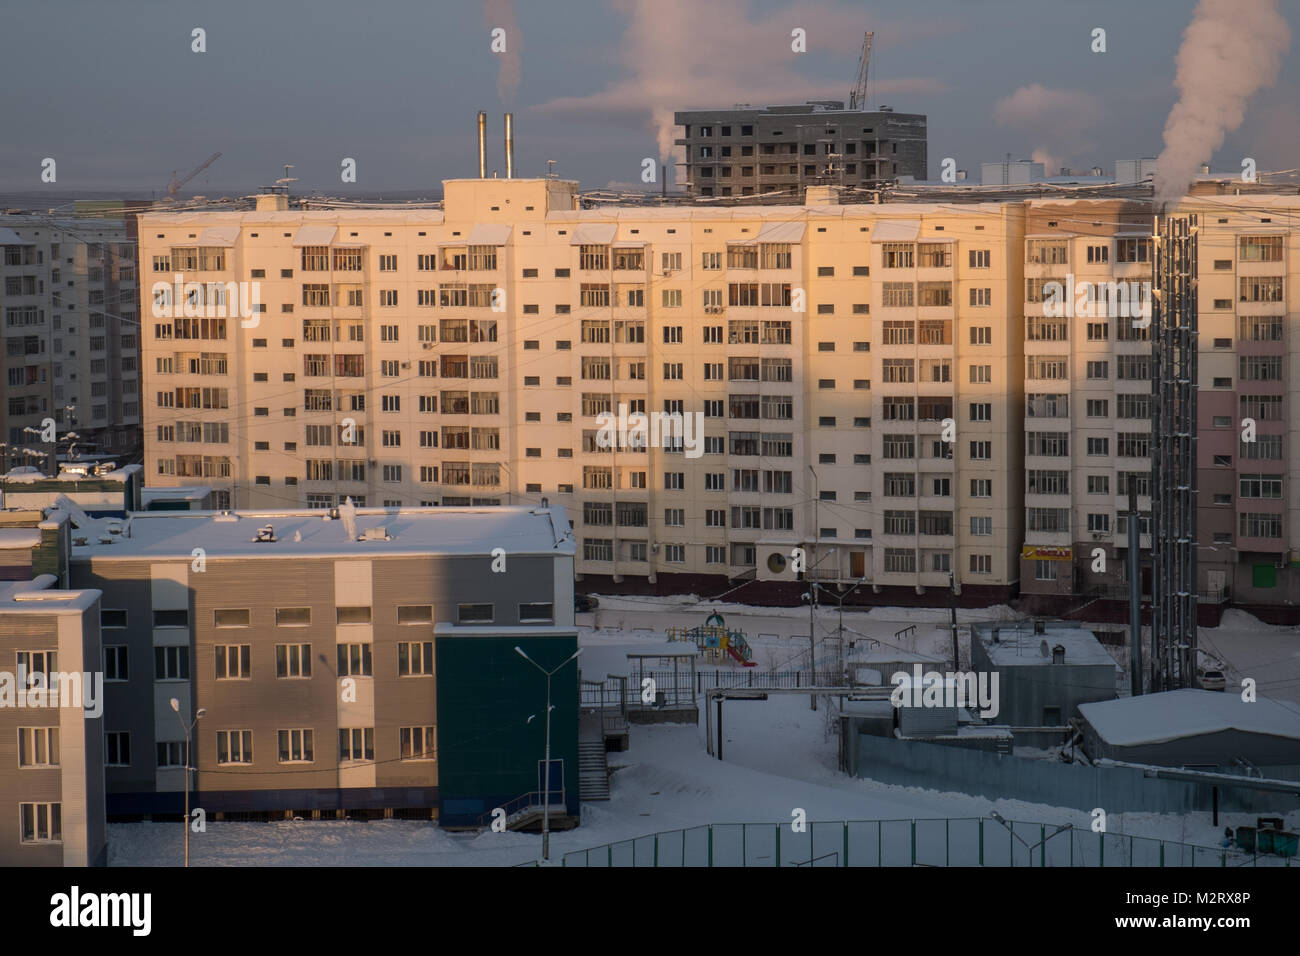 Accomodation buildings in Yakutsk, in Siberia. Yakutsk is the second coldest major city in the world after Norilsk, but Yakutsk sees colder temperatur Stock Photo